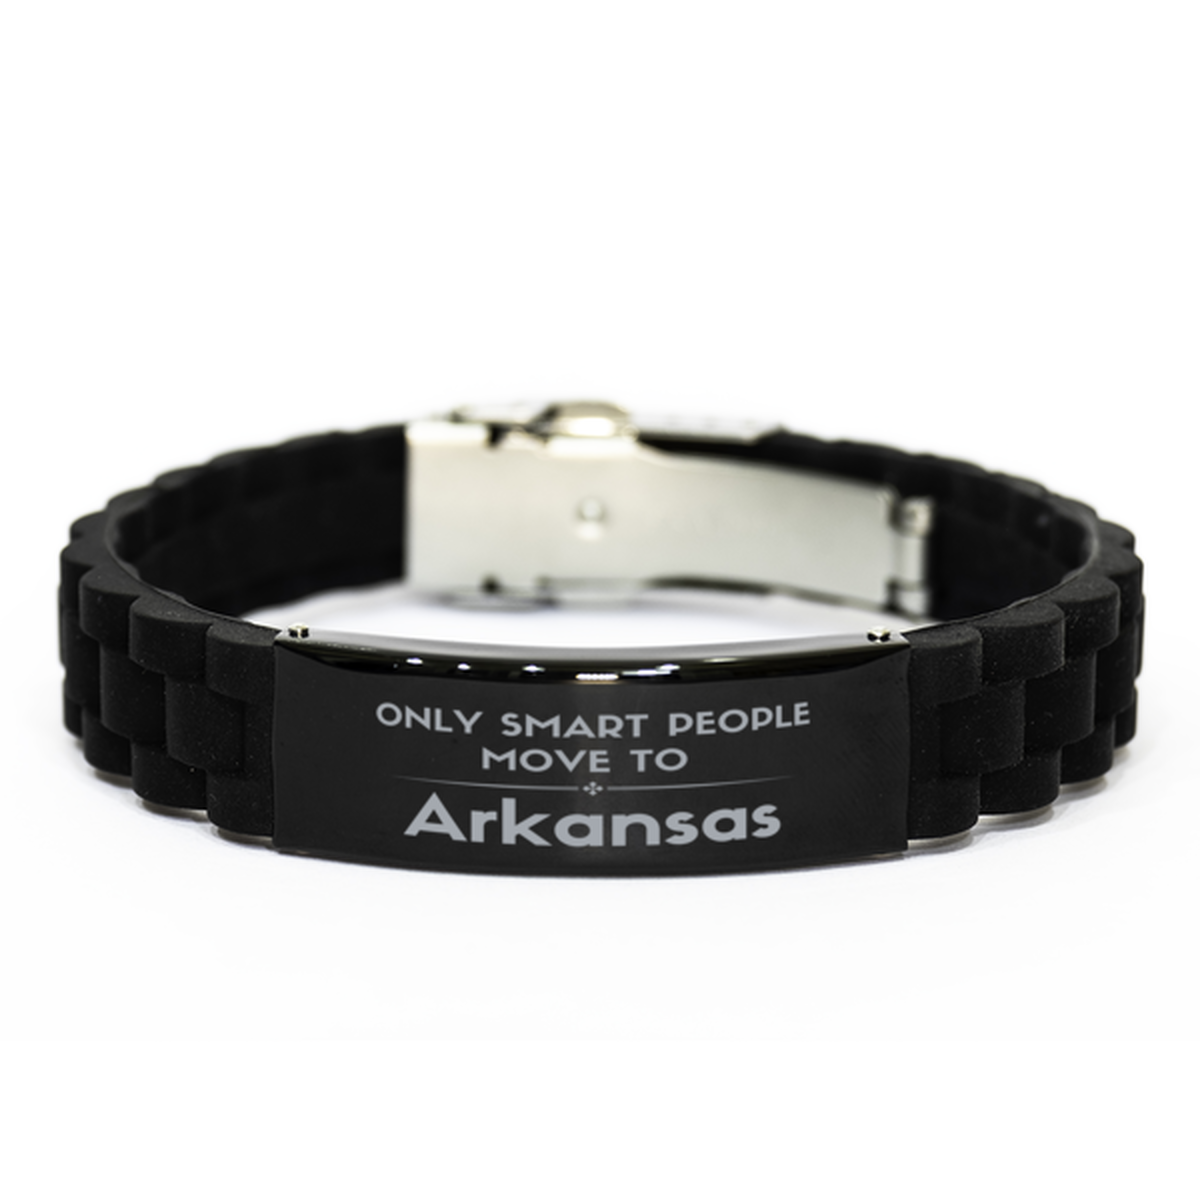 Only smart people move to Arkansas Black Glidelock Clasp Bracelet, Gag Gifts For Arkansas, Move to Arkansas Gifts for Friends Coworker Funny Saying Quote